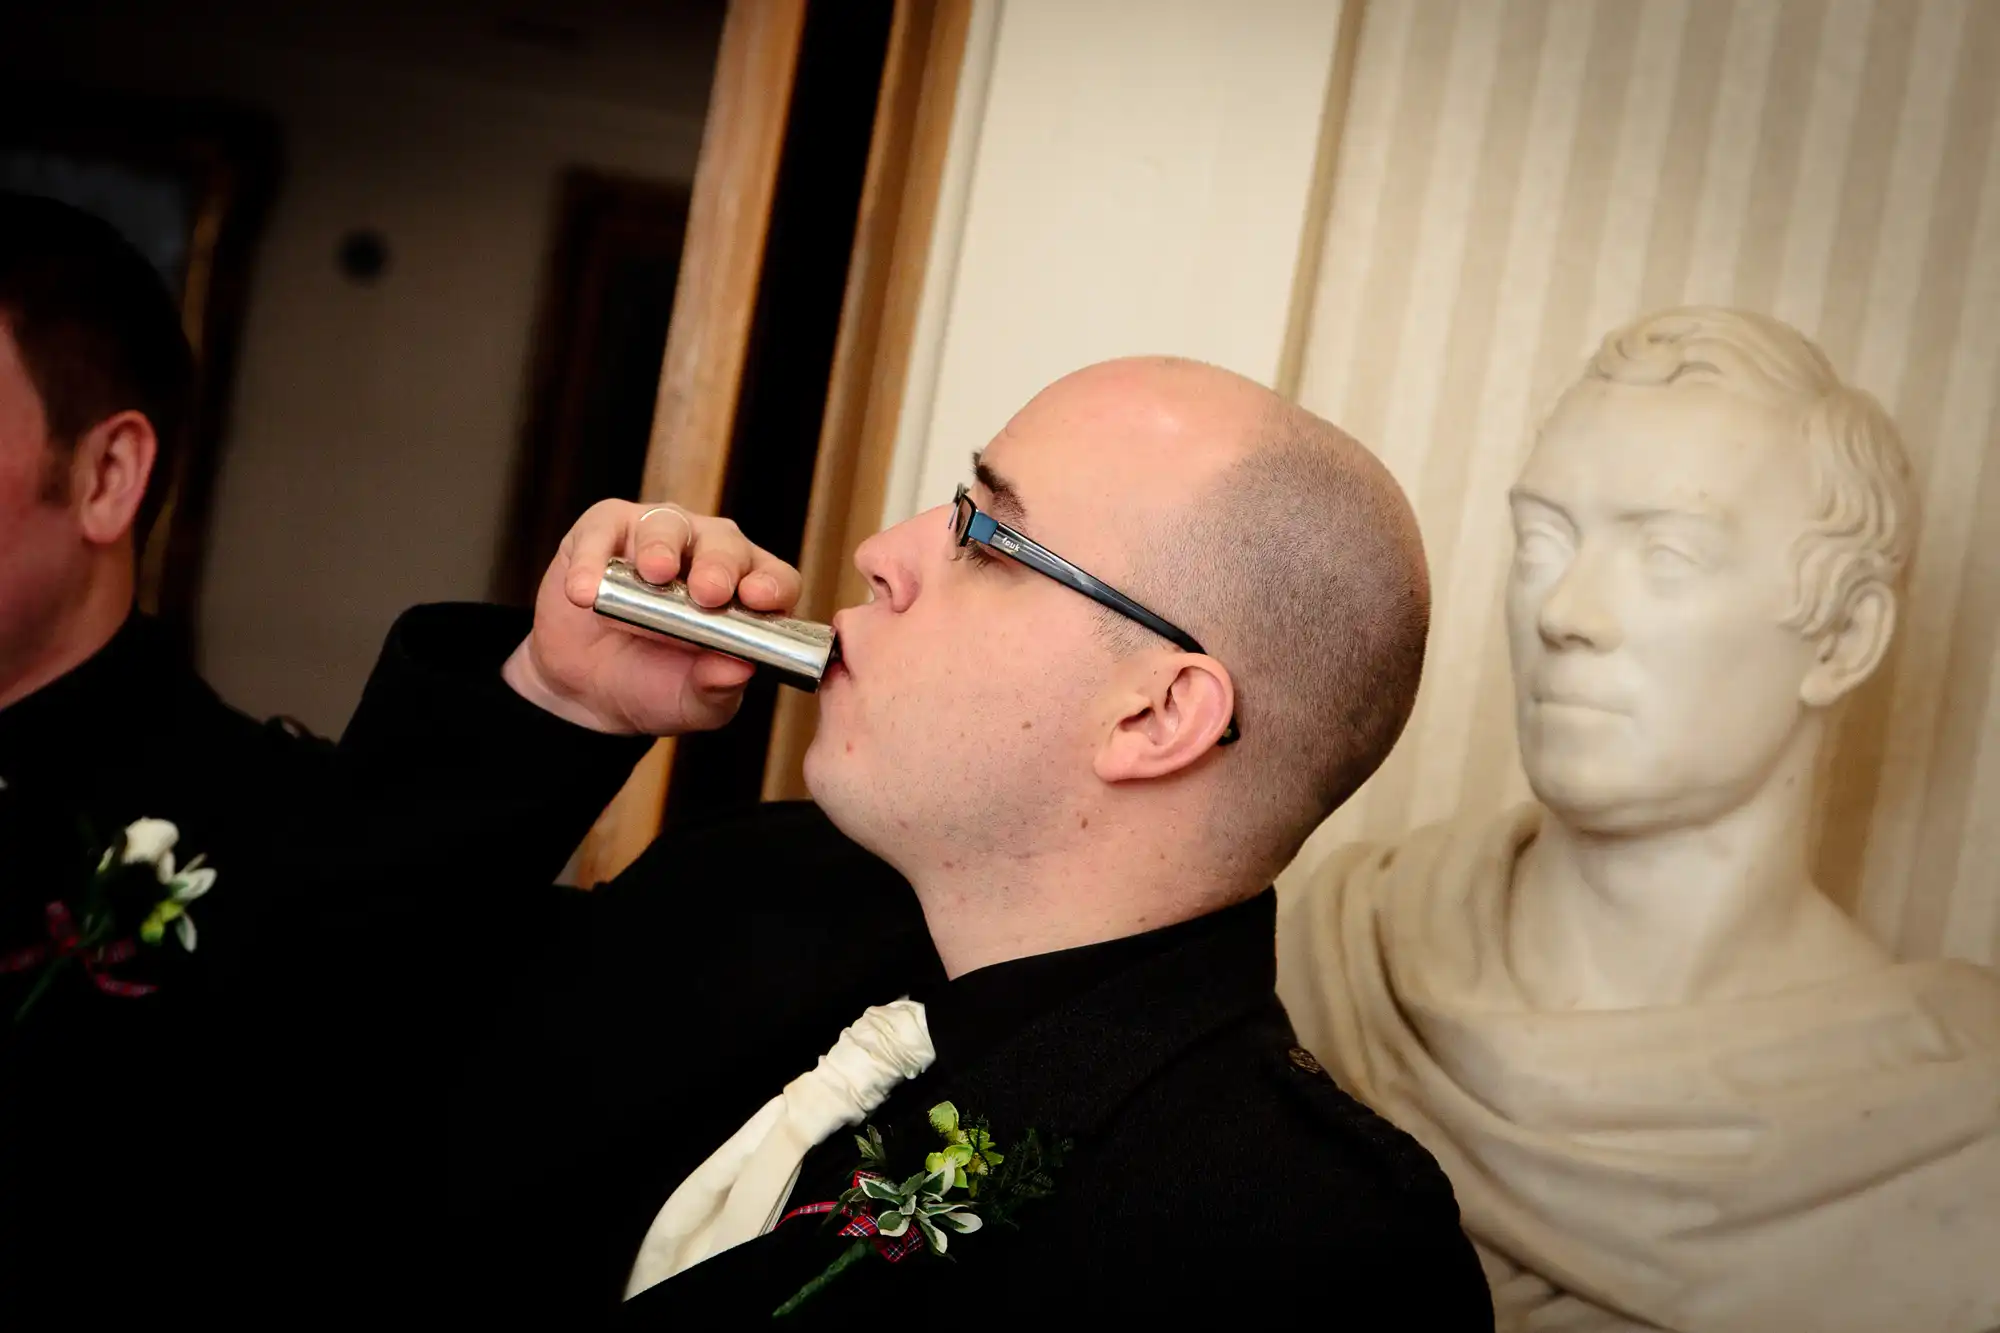 A man in a tuxedo with a boutonniere drinks from a flask, a bust sculpture in the background.